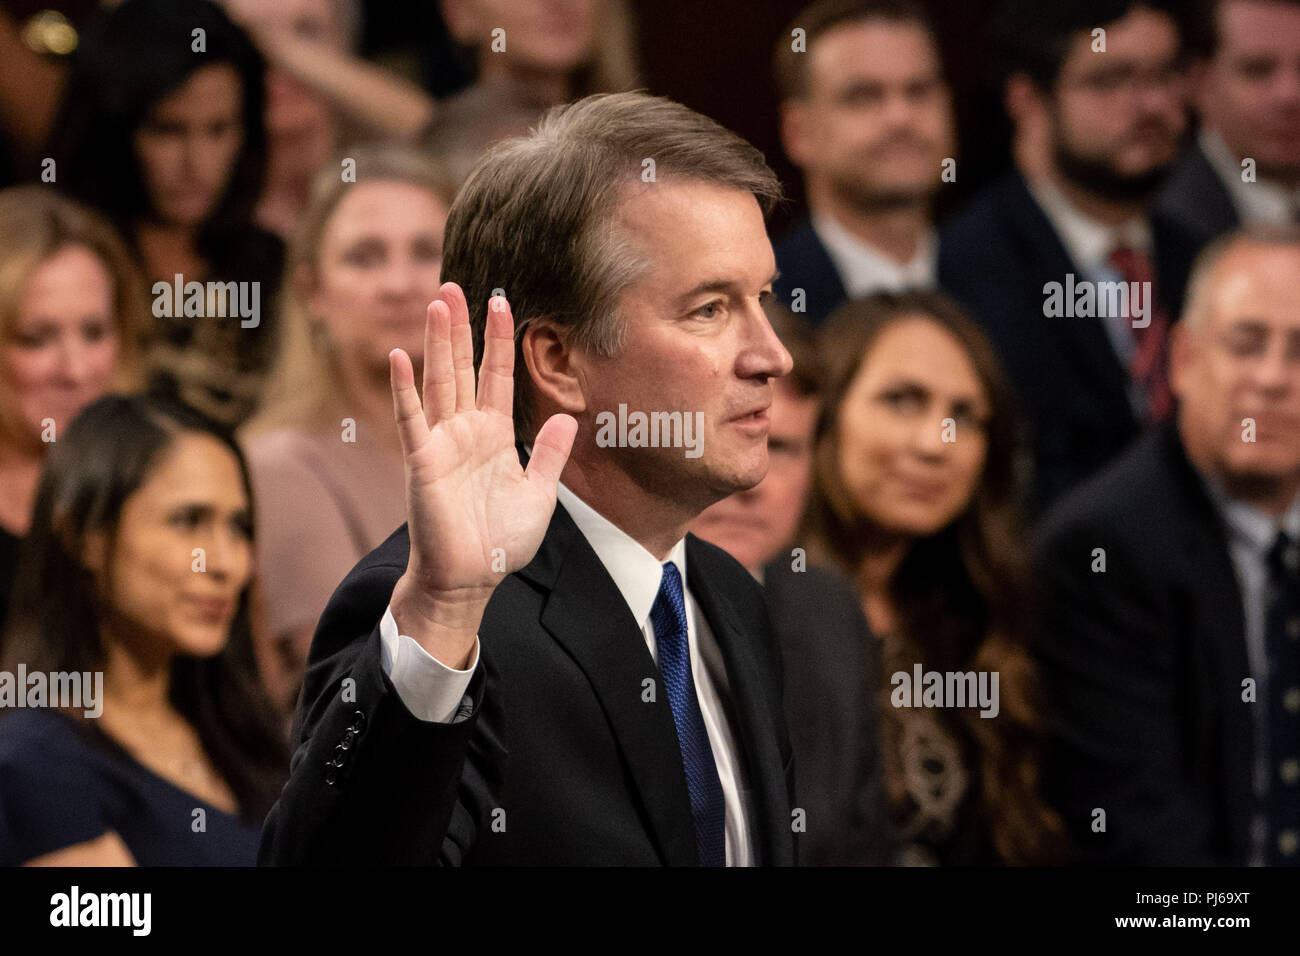 Washington, DC, USA. 4th Sep, 2018. U.S. Supreme Court Associate Justice nominee Brett Kavanaugh is sworn in during his confirmation hearing before the Senate Judiciary Committee in the Hart Senate Office Building in Washington, DC on Sept 4, 2018. Credit: Ken Cedeno/ZUMA Wire/Alamy Live News Stock Photo